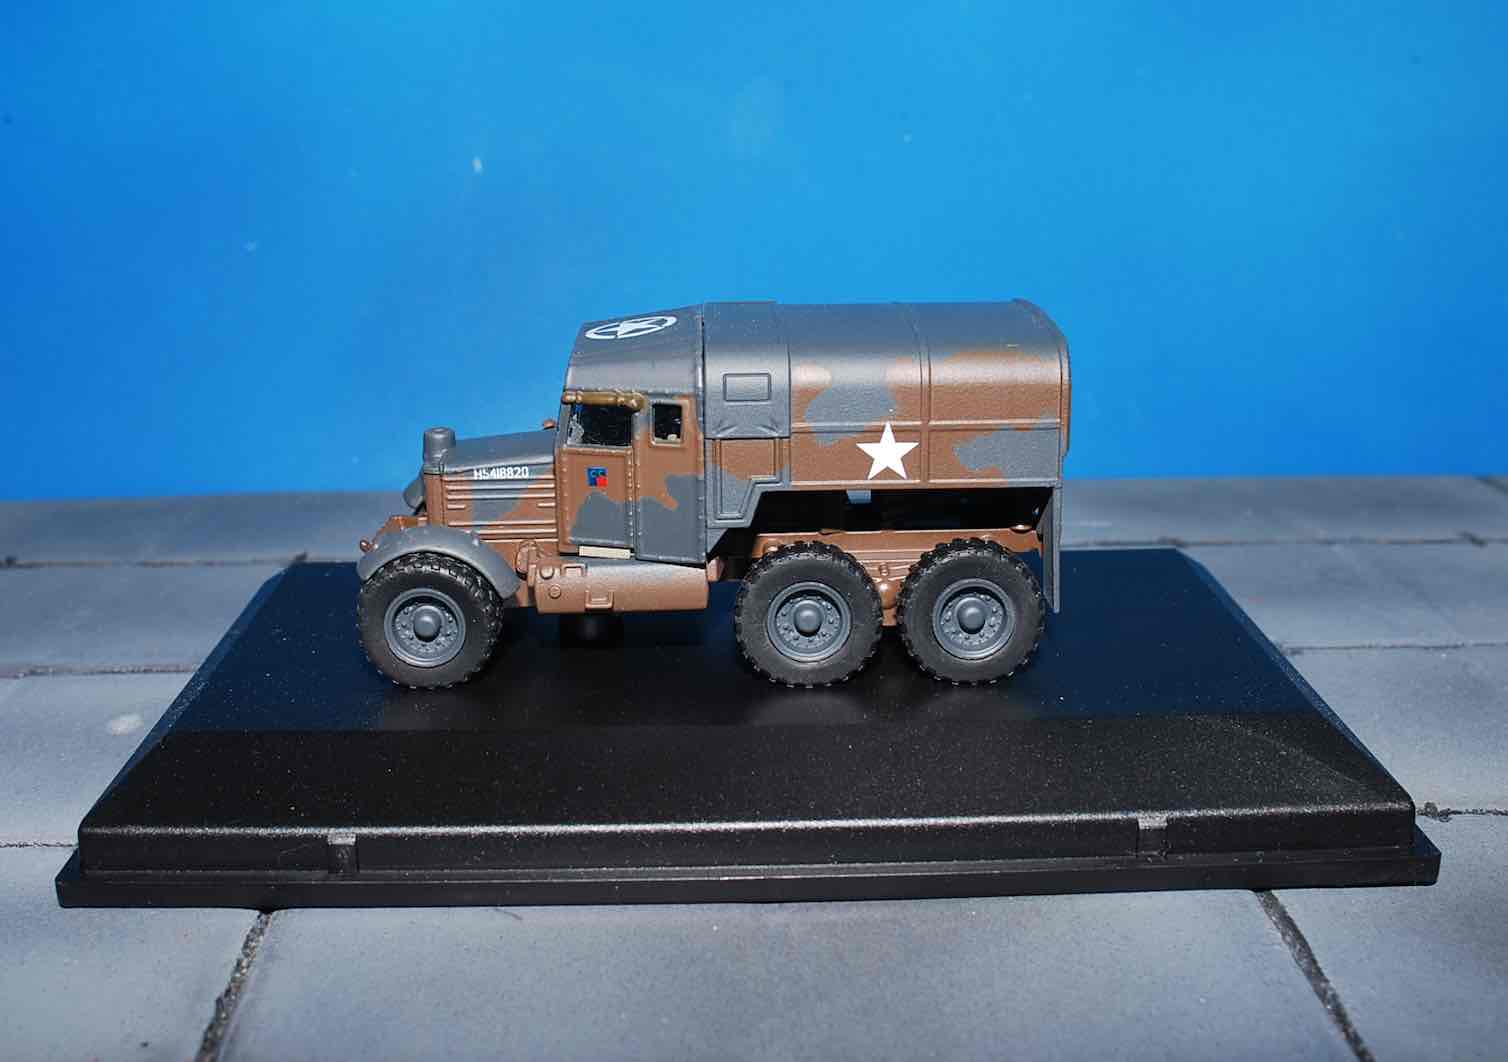 Oxford Military 1/76 Scammell Pioneer R100 Recovery Tractor British 76SP007 